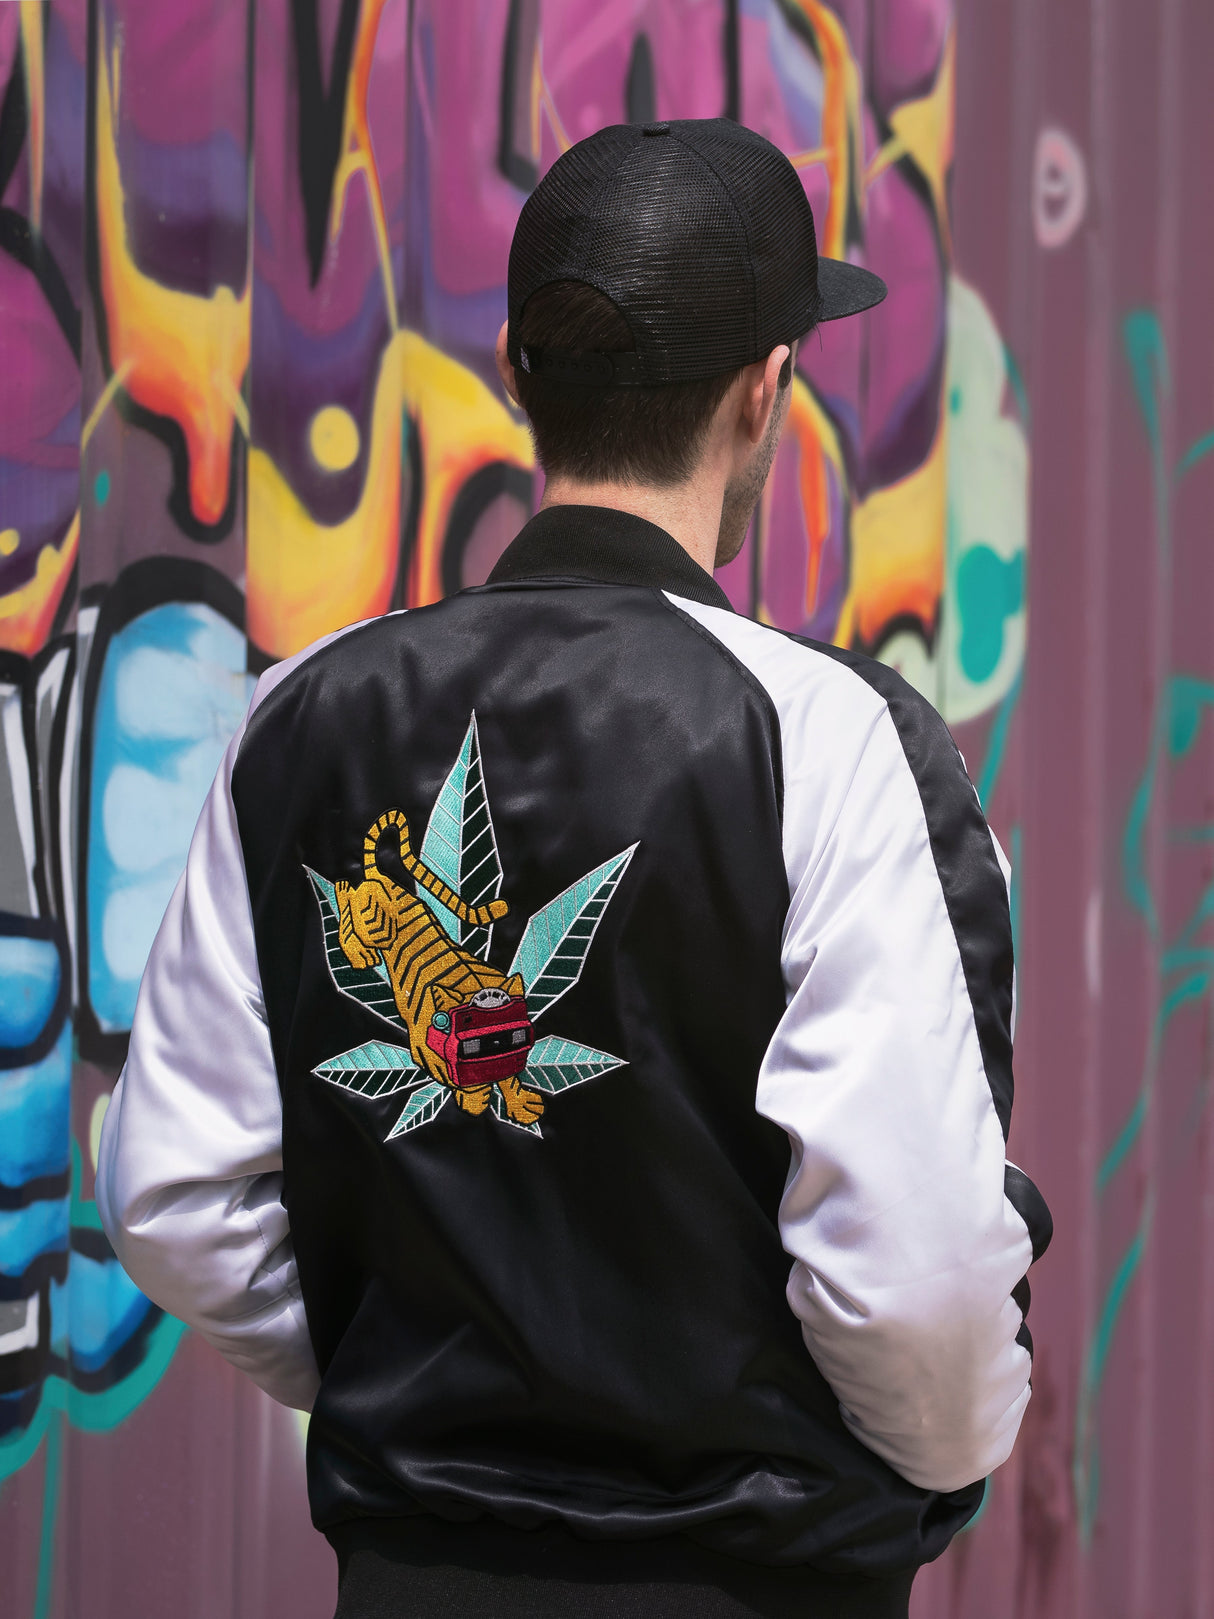 Person wearing GRAV Satin Bomber Jacket with logo on back, standing in front of graffiti wall